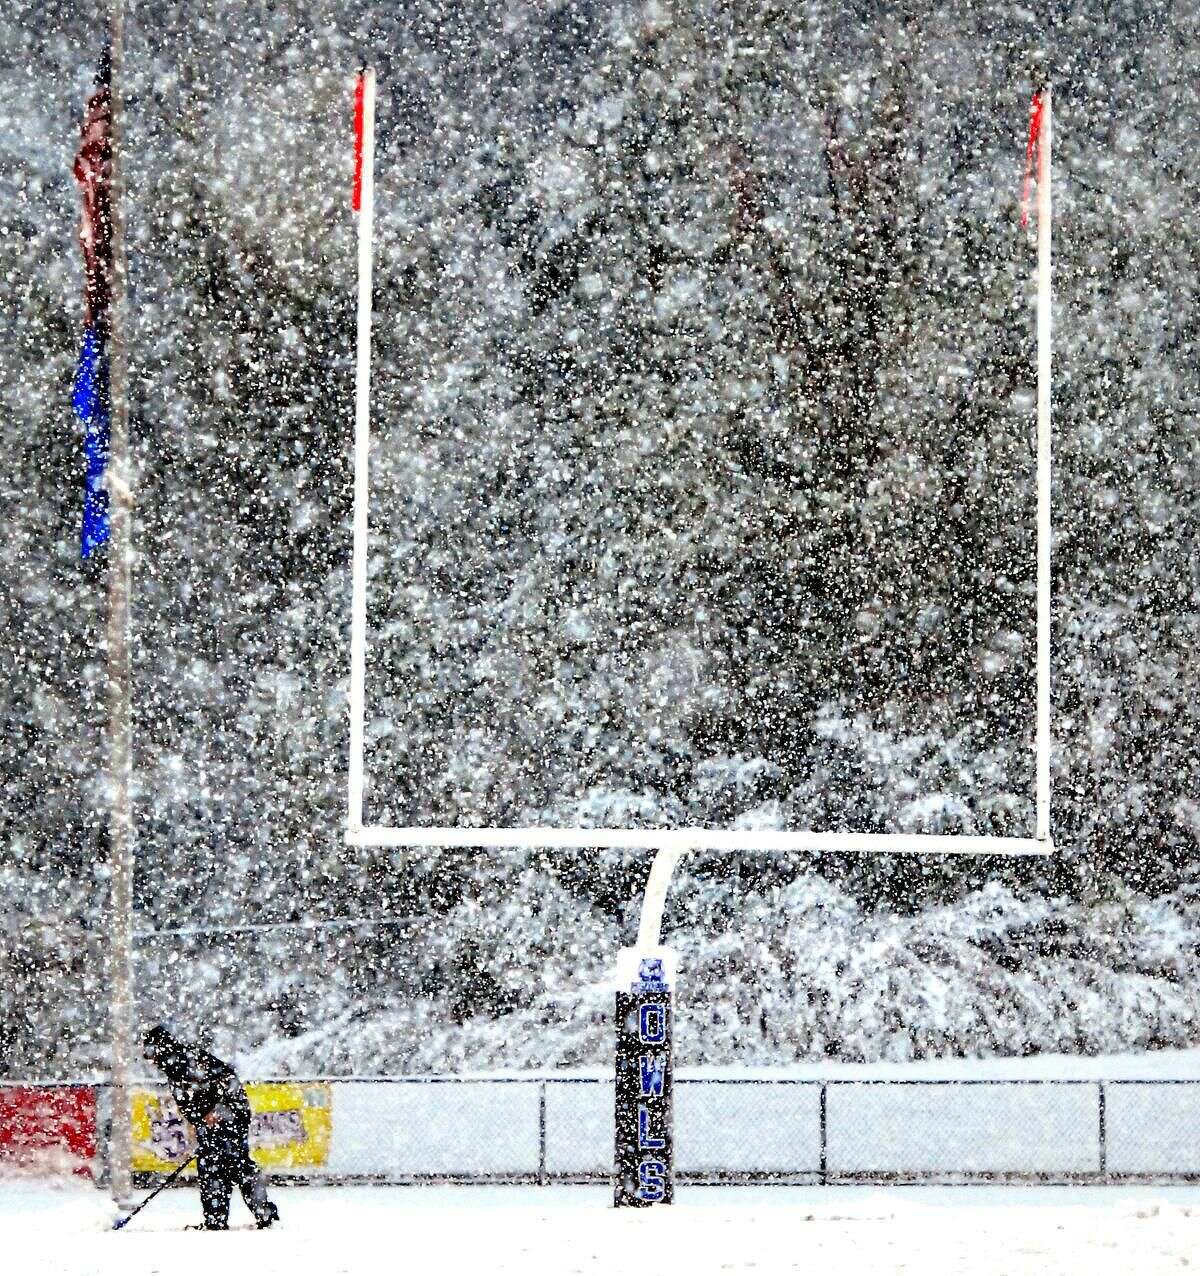 Photo by Arnold Gold Saturday's snowstorm created numerous problems for athletic teams — as shown by this picture of Southern Connecticut State's football field — but even now the lingering aftereffects of the snow are creating headaches for high school programs across the state.